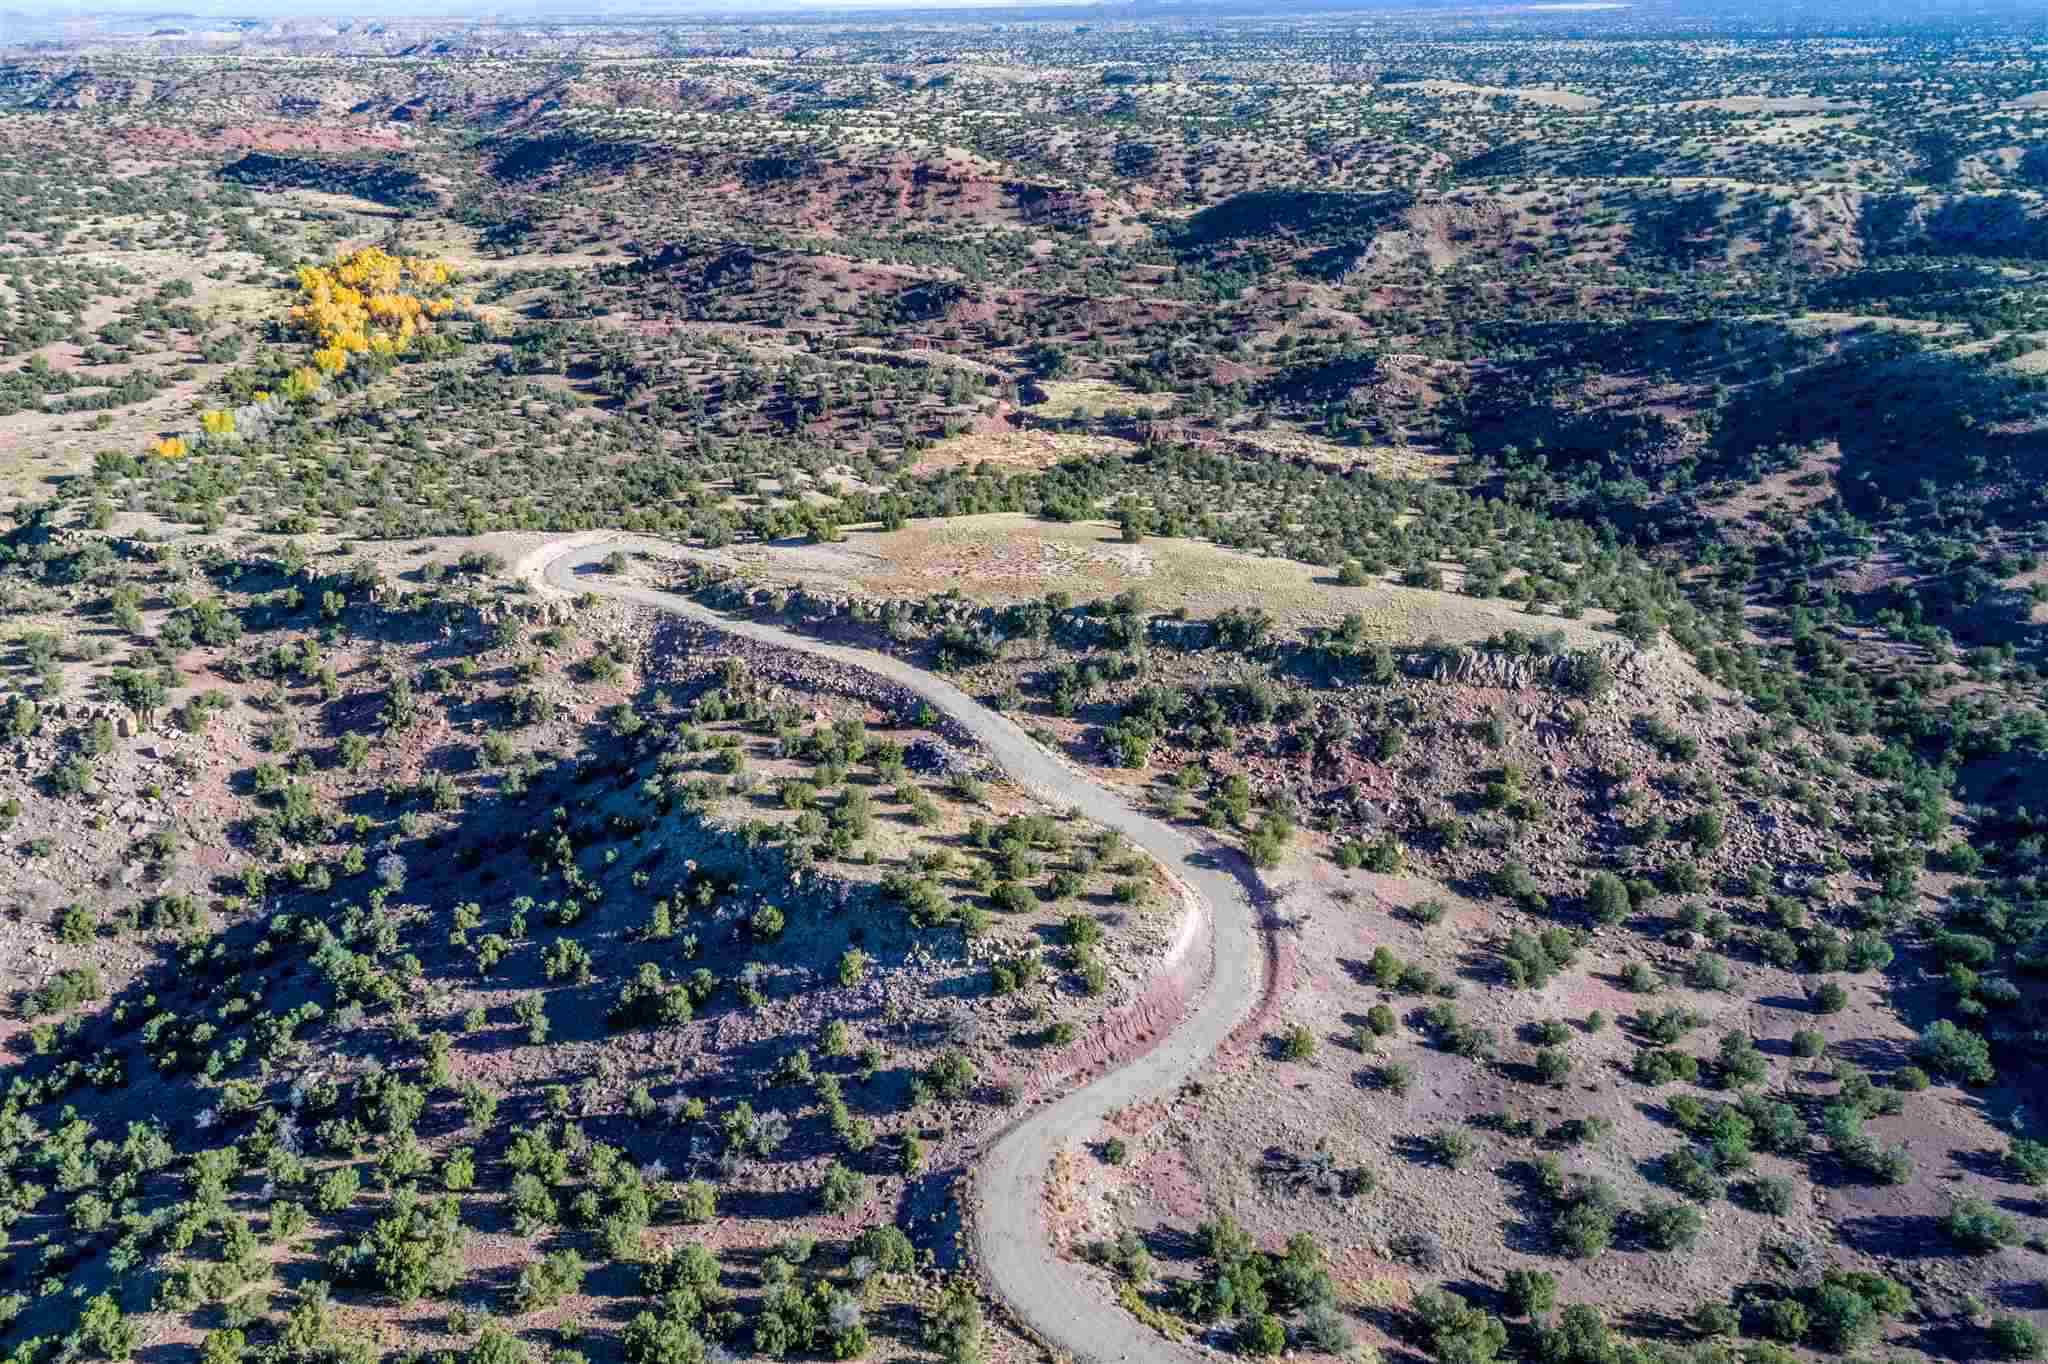 71 Creekside Trail, Sandia Park, New Mexico 87047, ,Land,For Sale,71 Creekside Trail,202233359